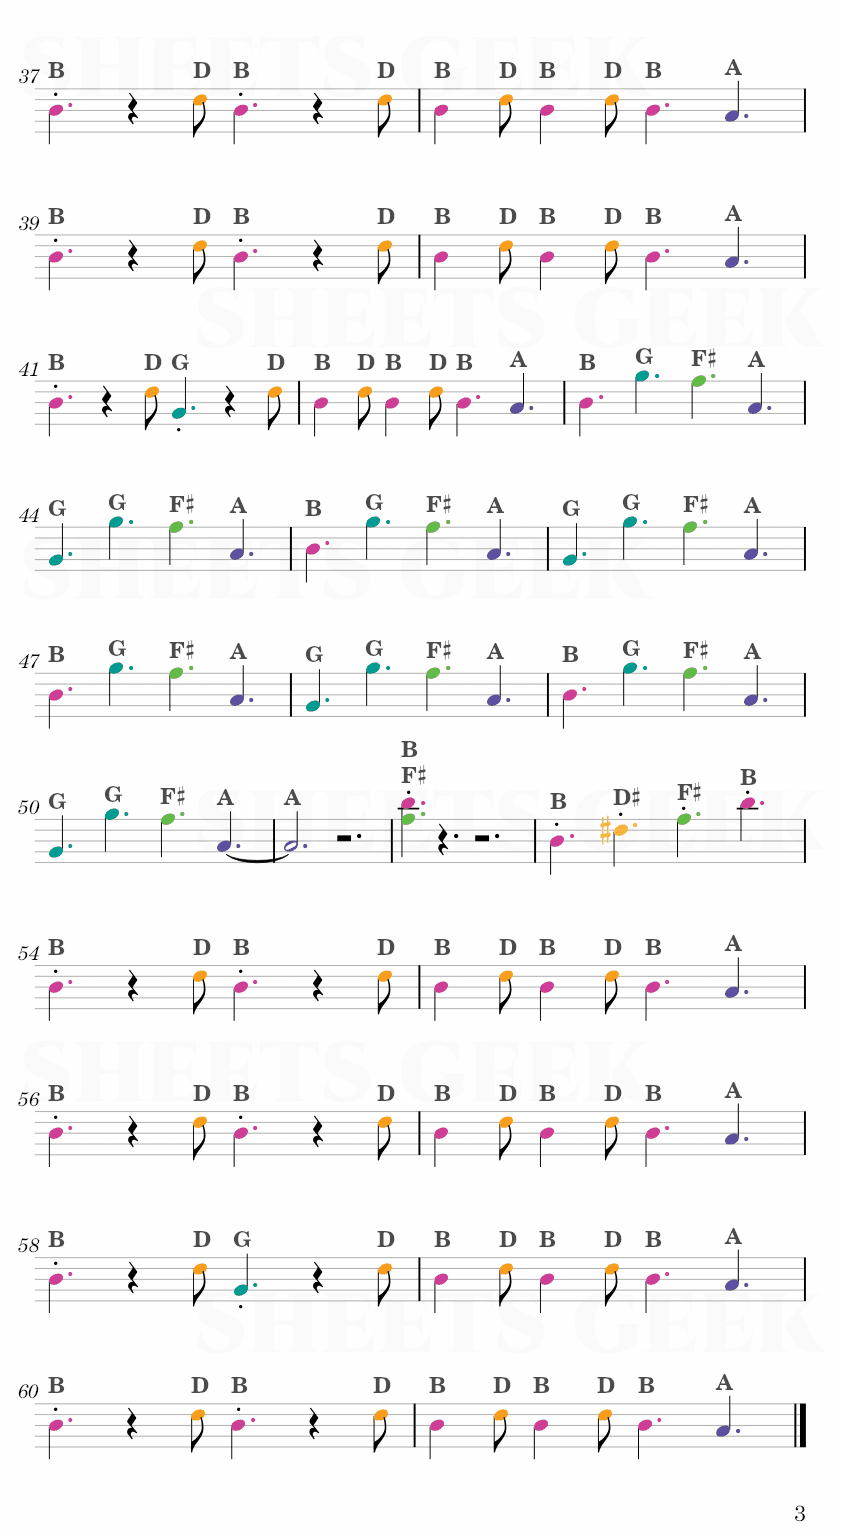 My Alcoholic Friends - The Dresden Dolls Easy Sheet Music Free for piano, keyboard, flute, violin, sax, cello page 3